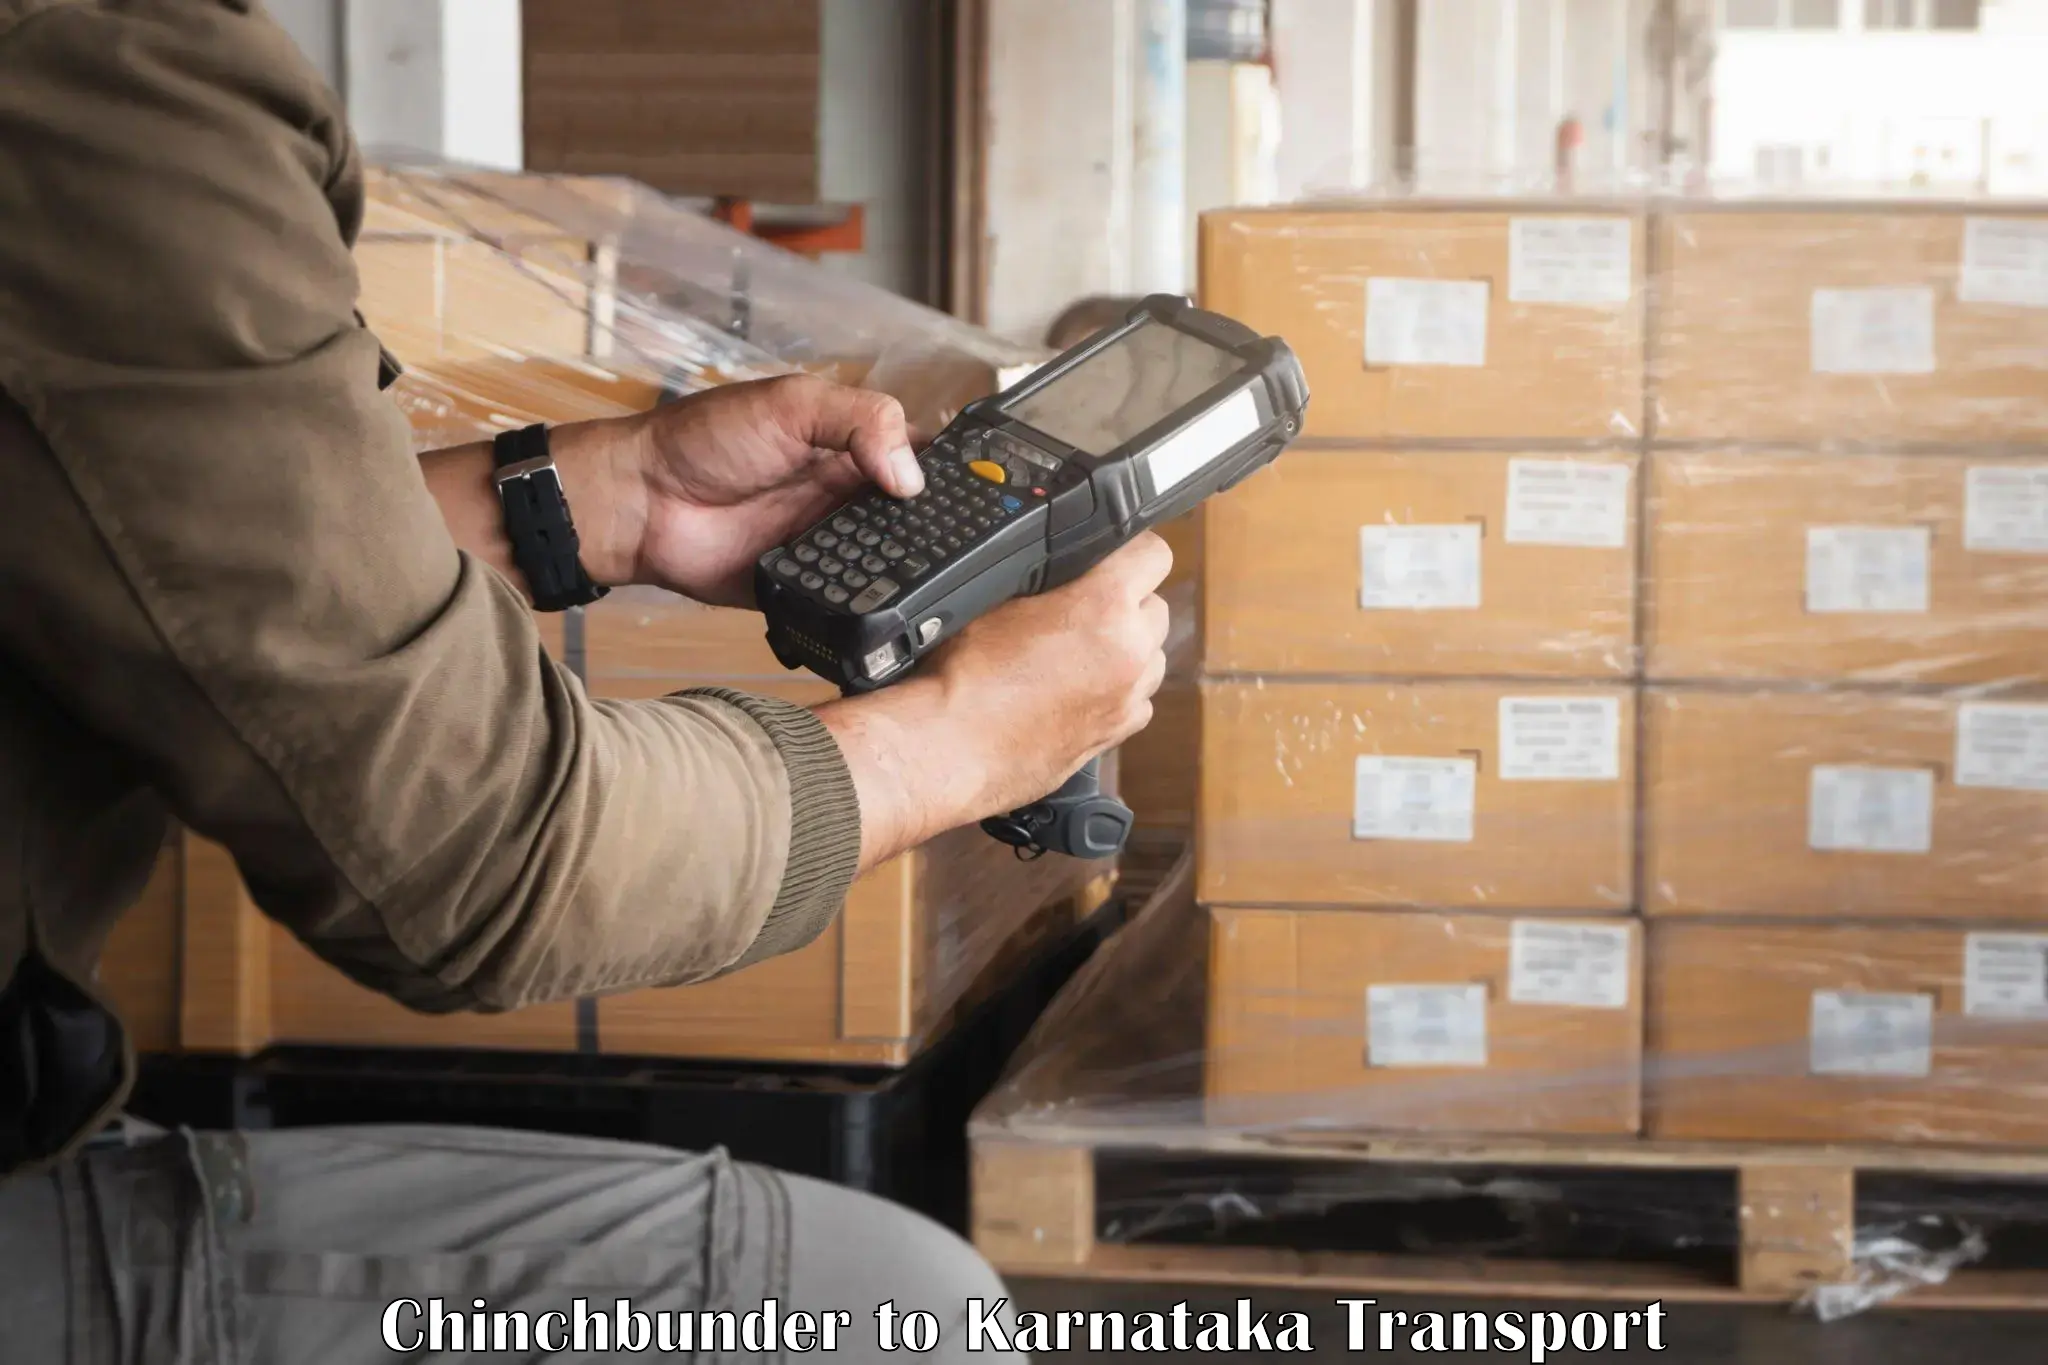 Goods delivery service Chinchbunder to Mangalore Port